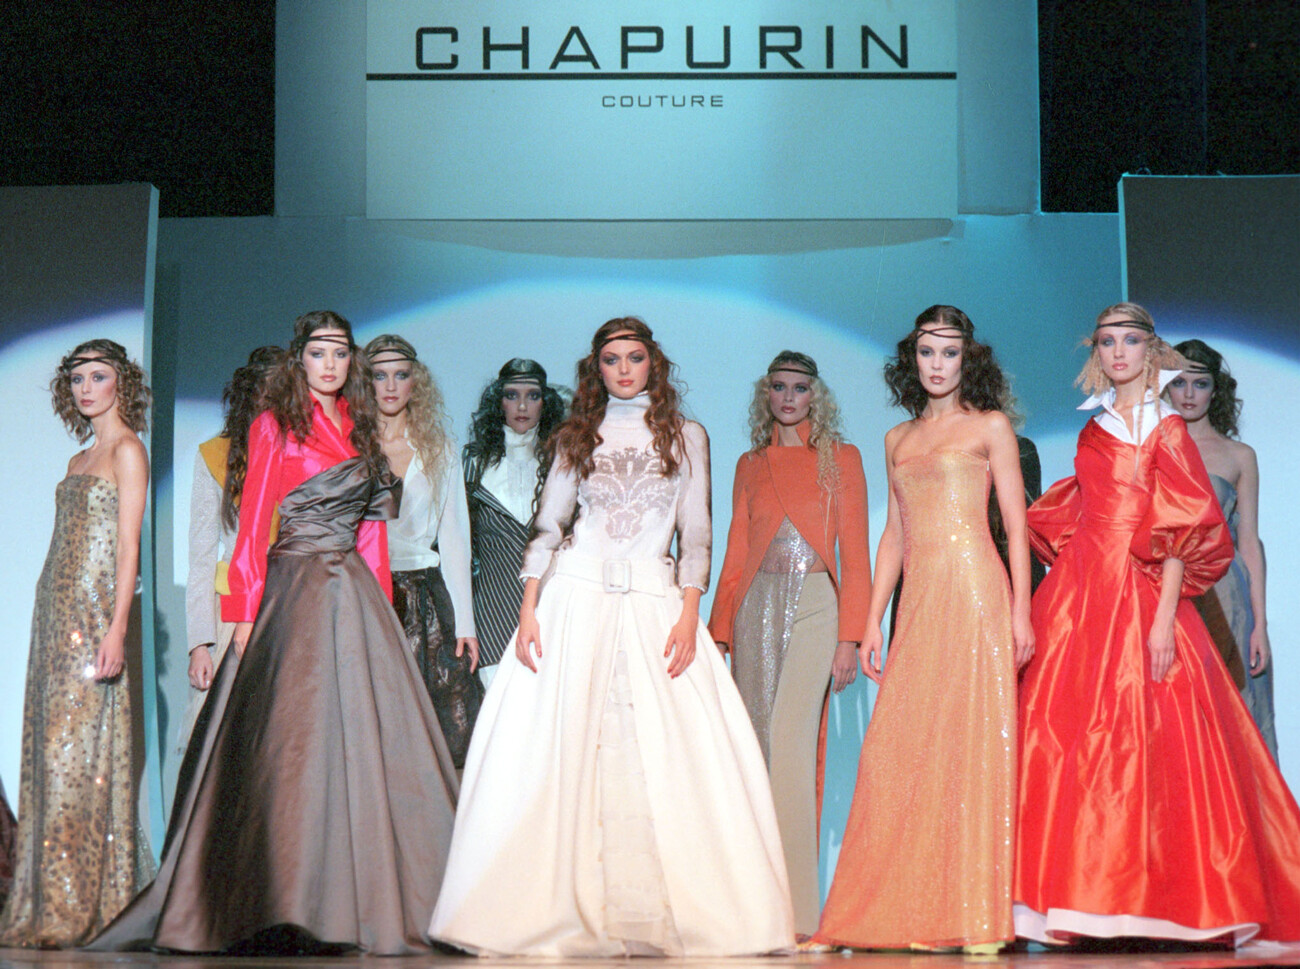 Igor Chapurin presents his new collection at the Moscow Fashion Week, 2000.